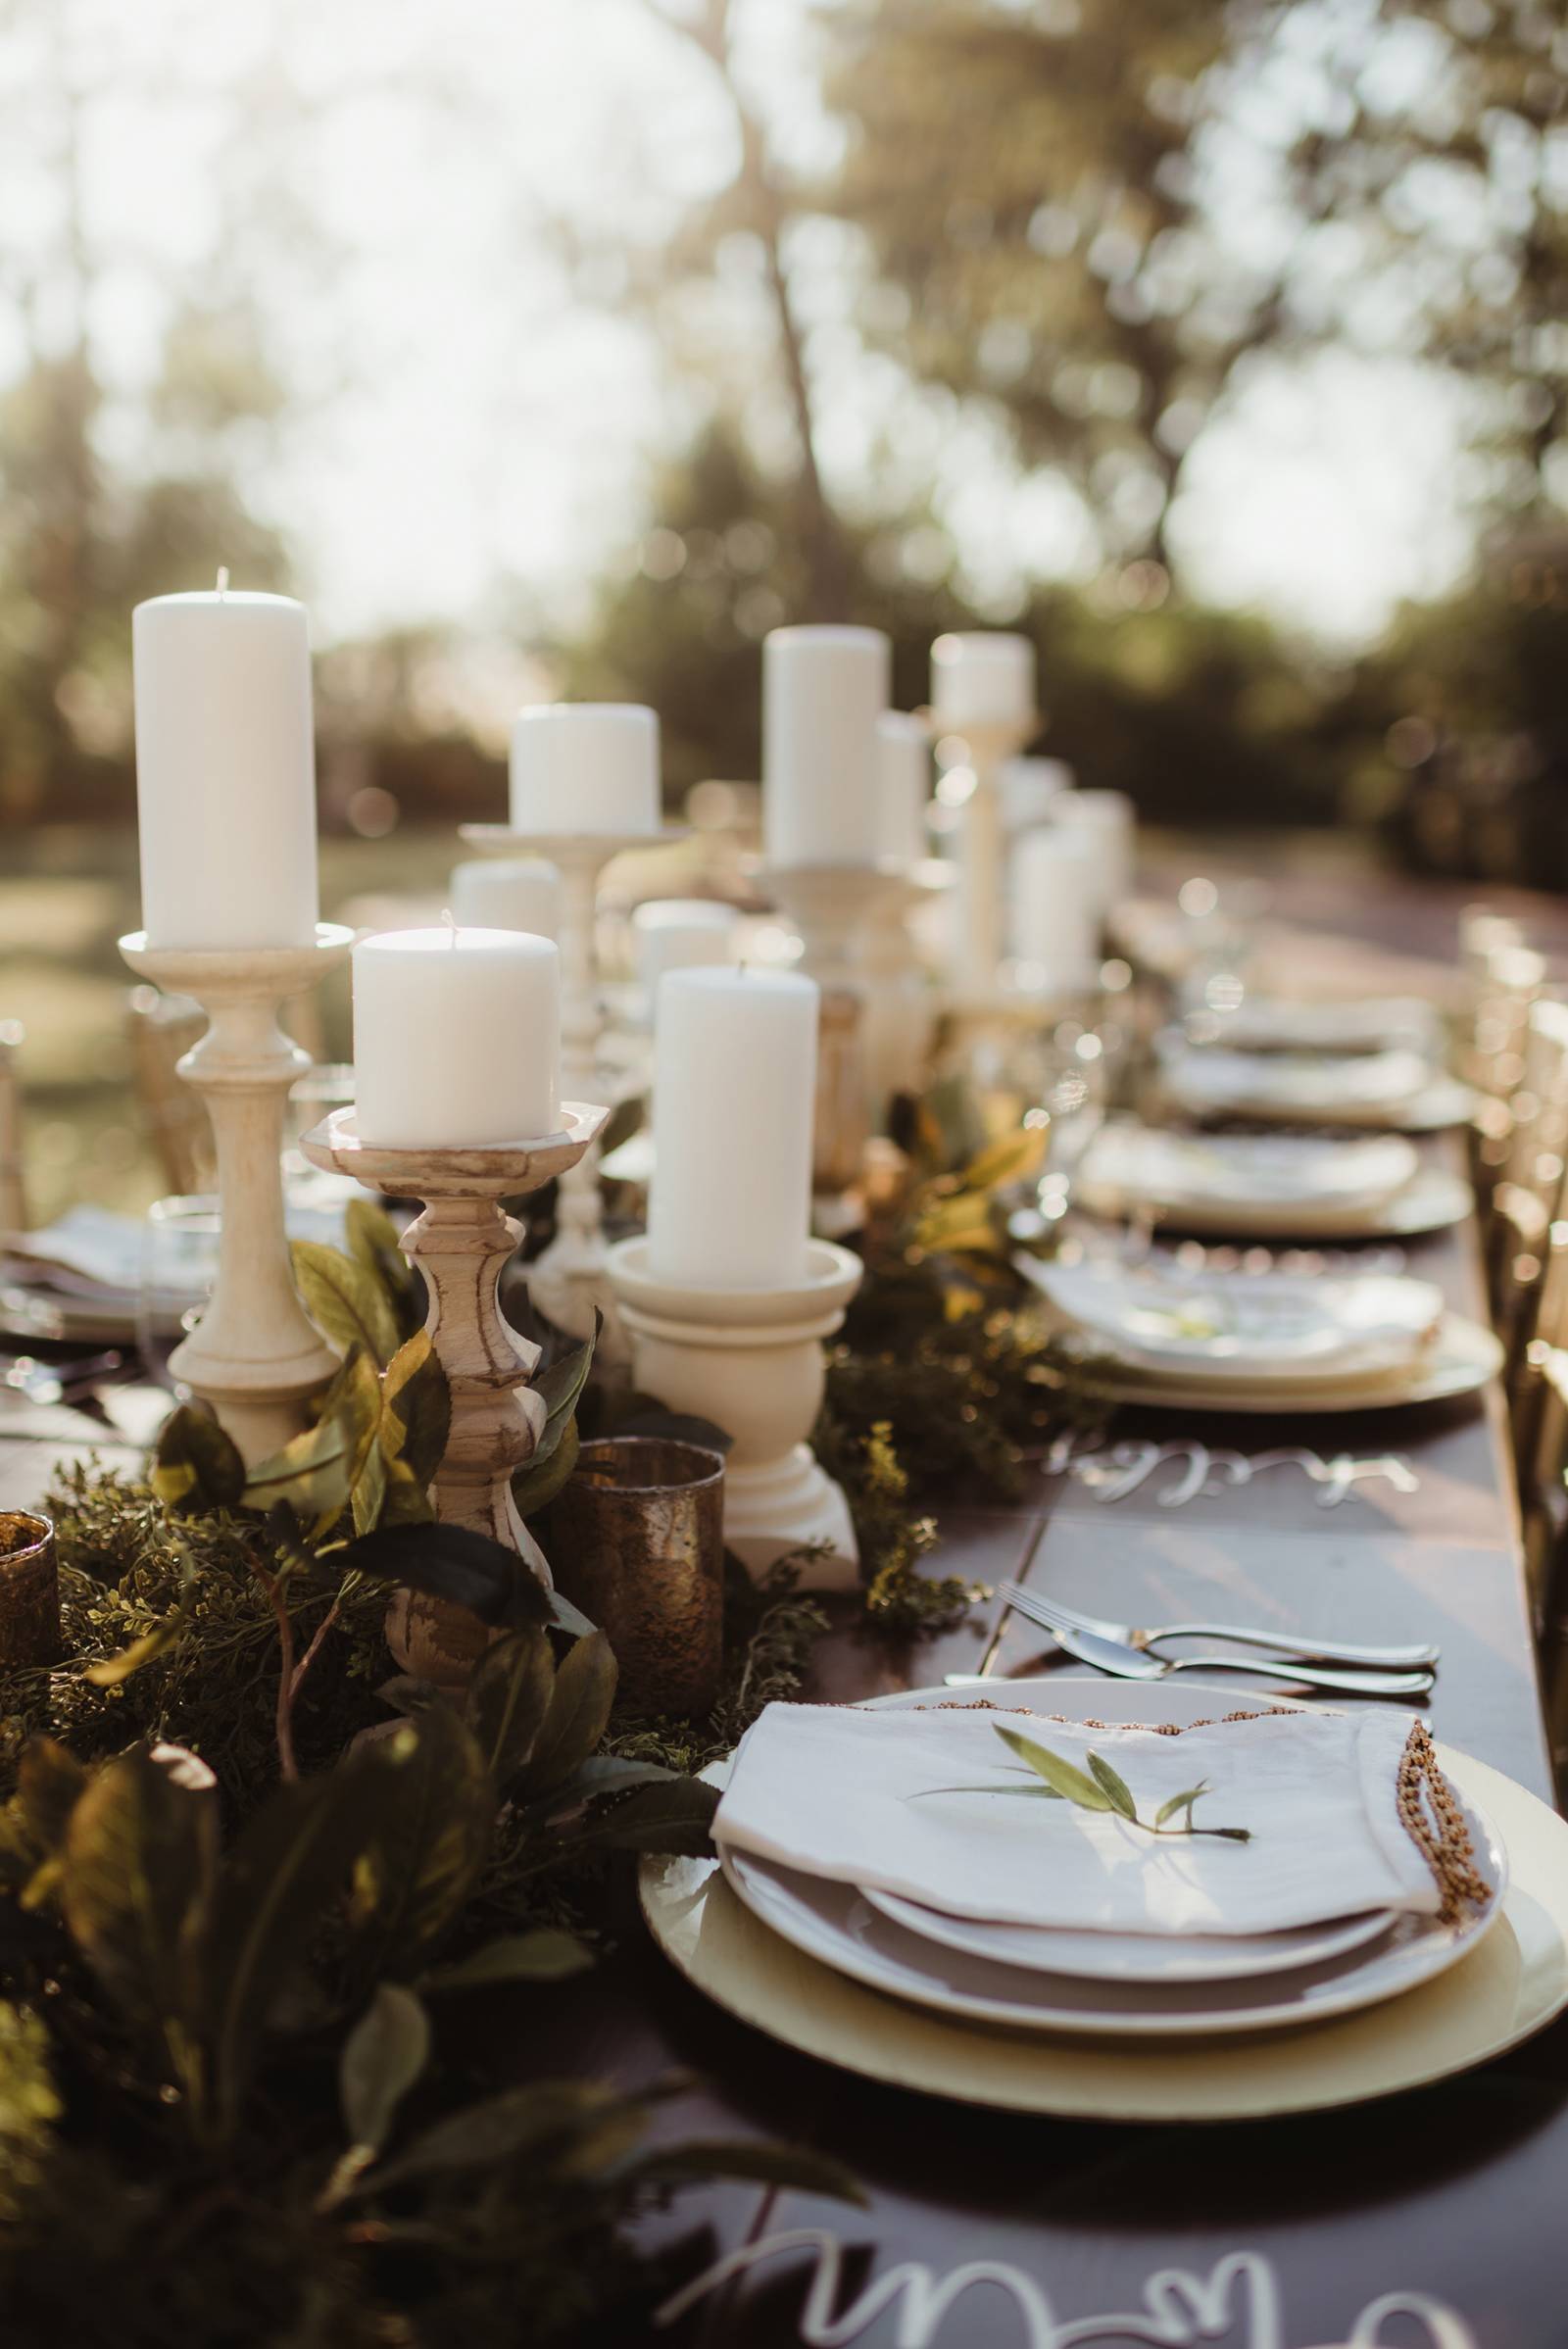 white candles, table setting, table settings, greenery, al fresco dining, table decor, place card fl